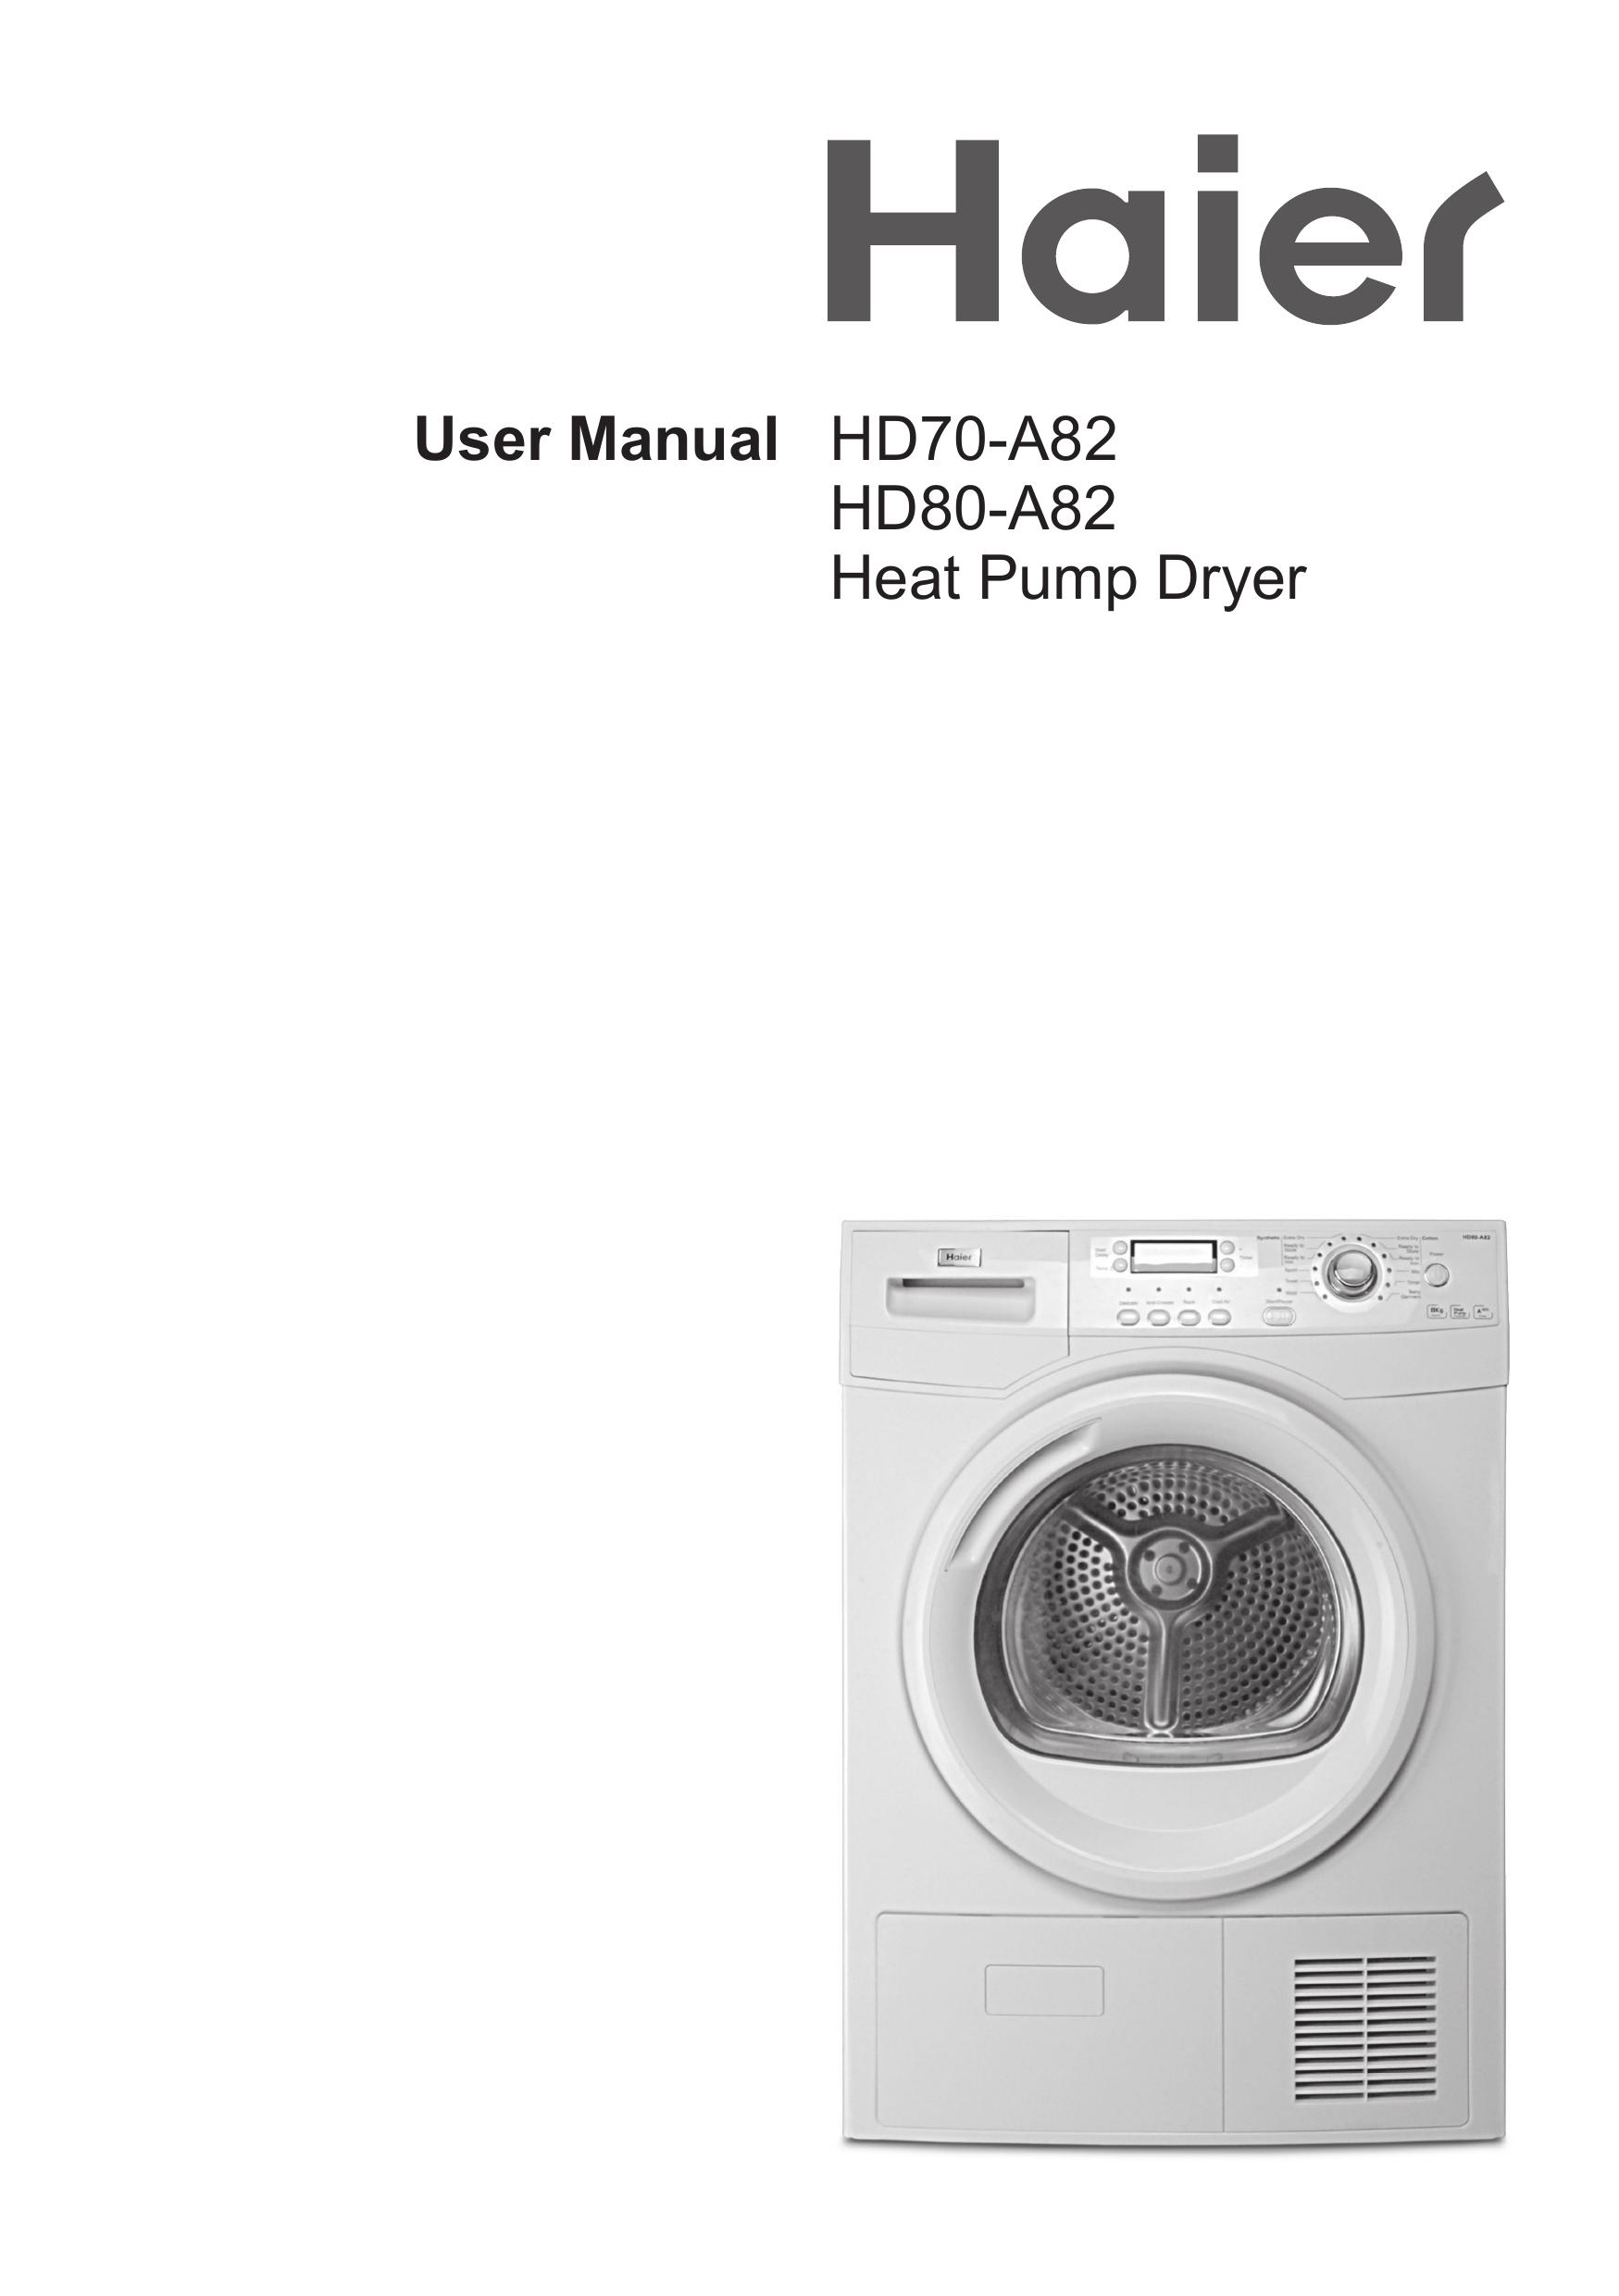 Haier HD80-A82 Washer/Dryer User Manual